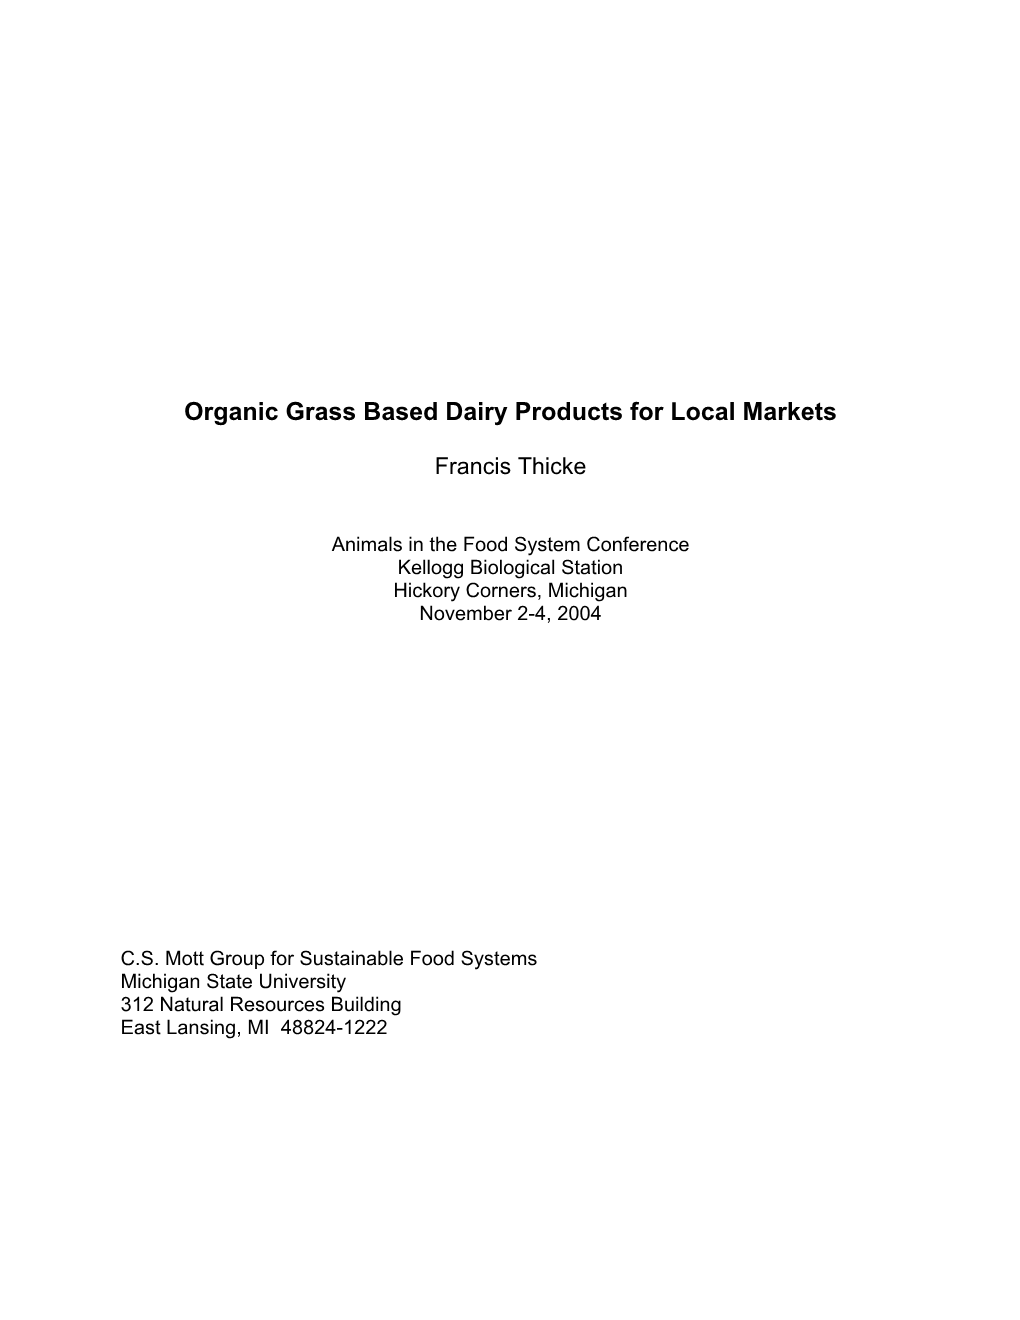 Organic Grass Based Dairy Products for Local Markets